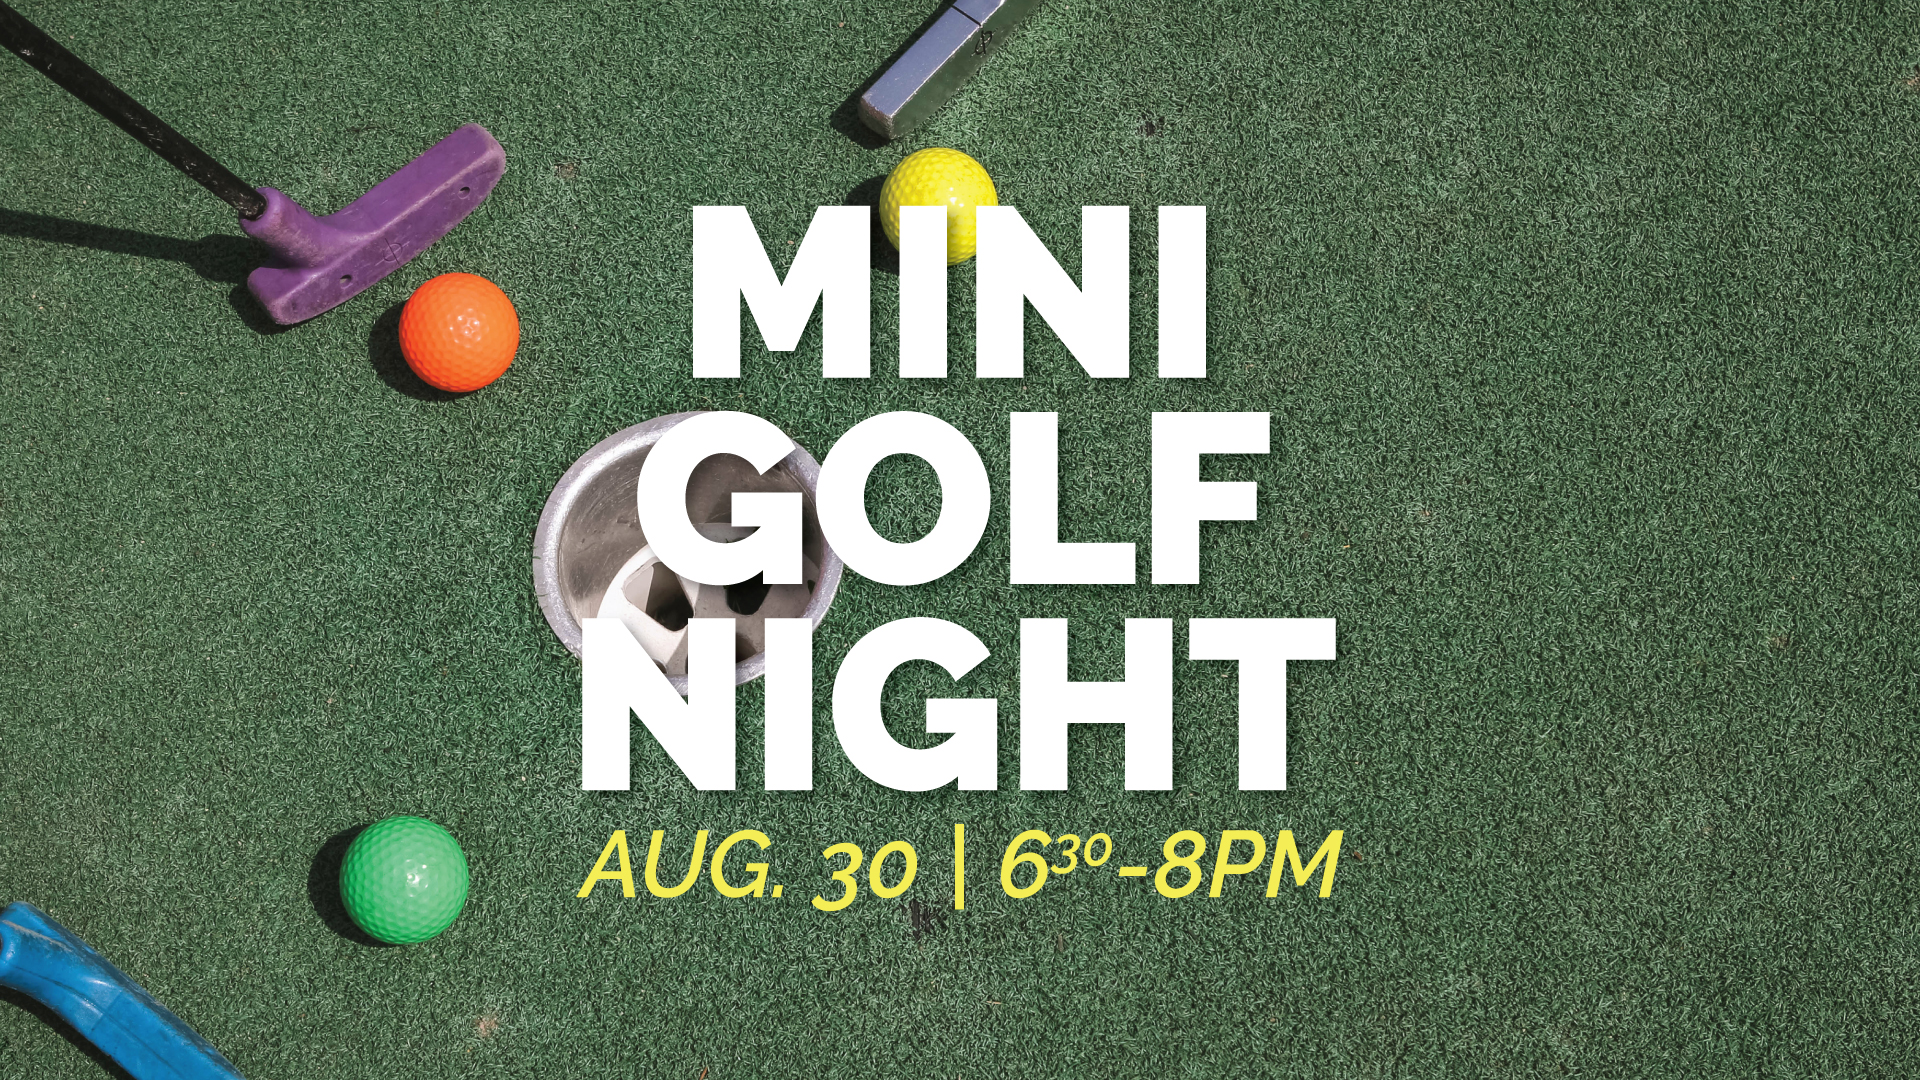 Mini Golf Night | August 30 from 6:30-8PM at Manor Church